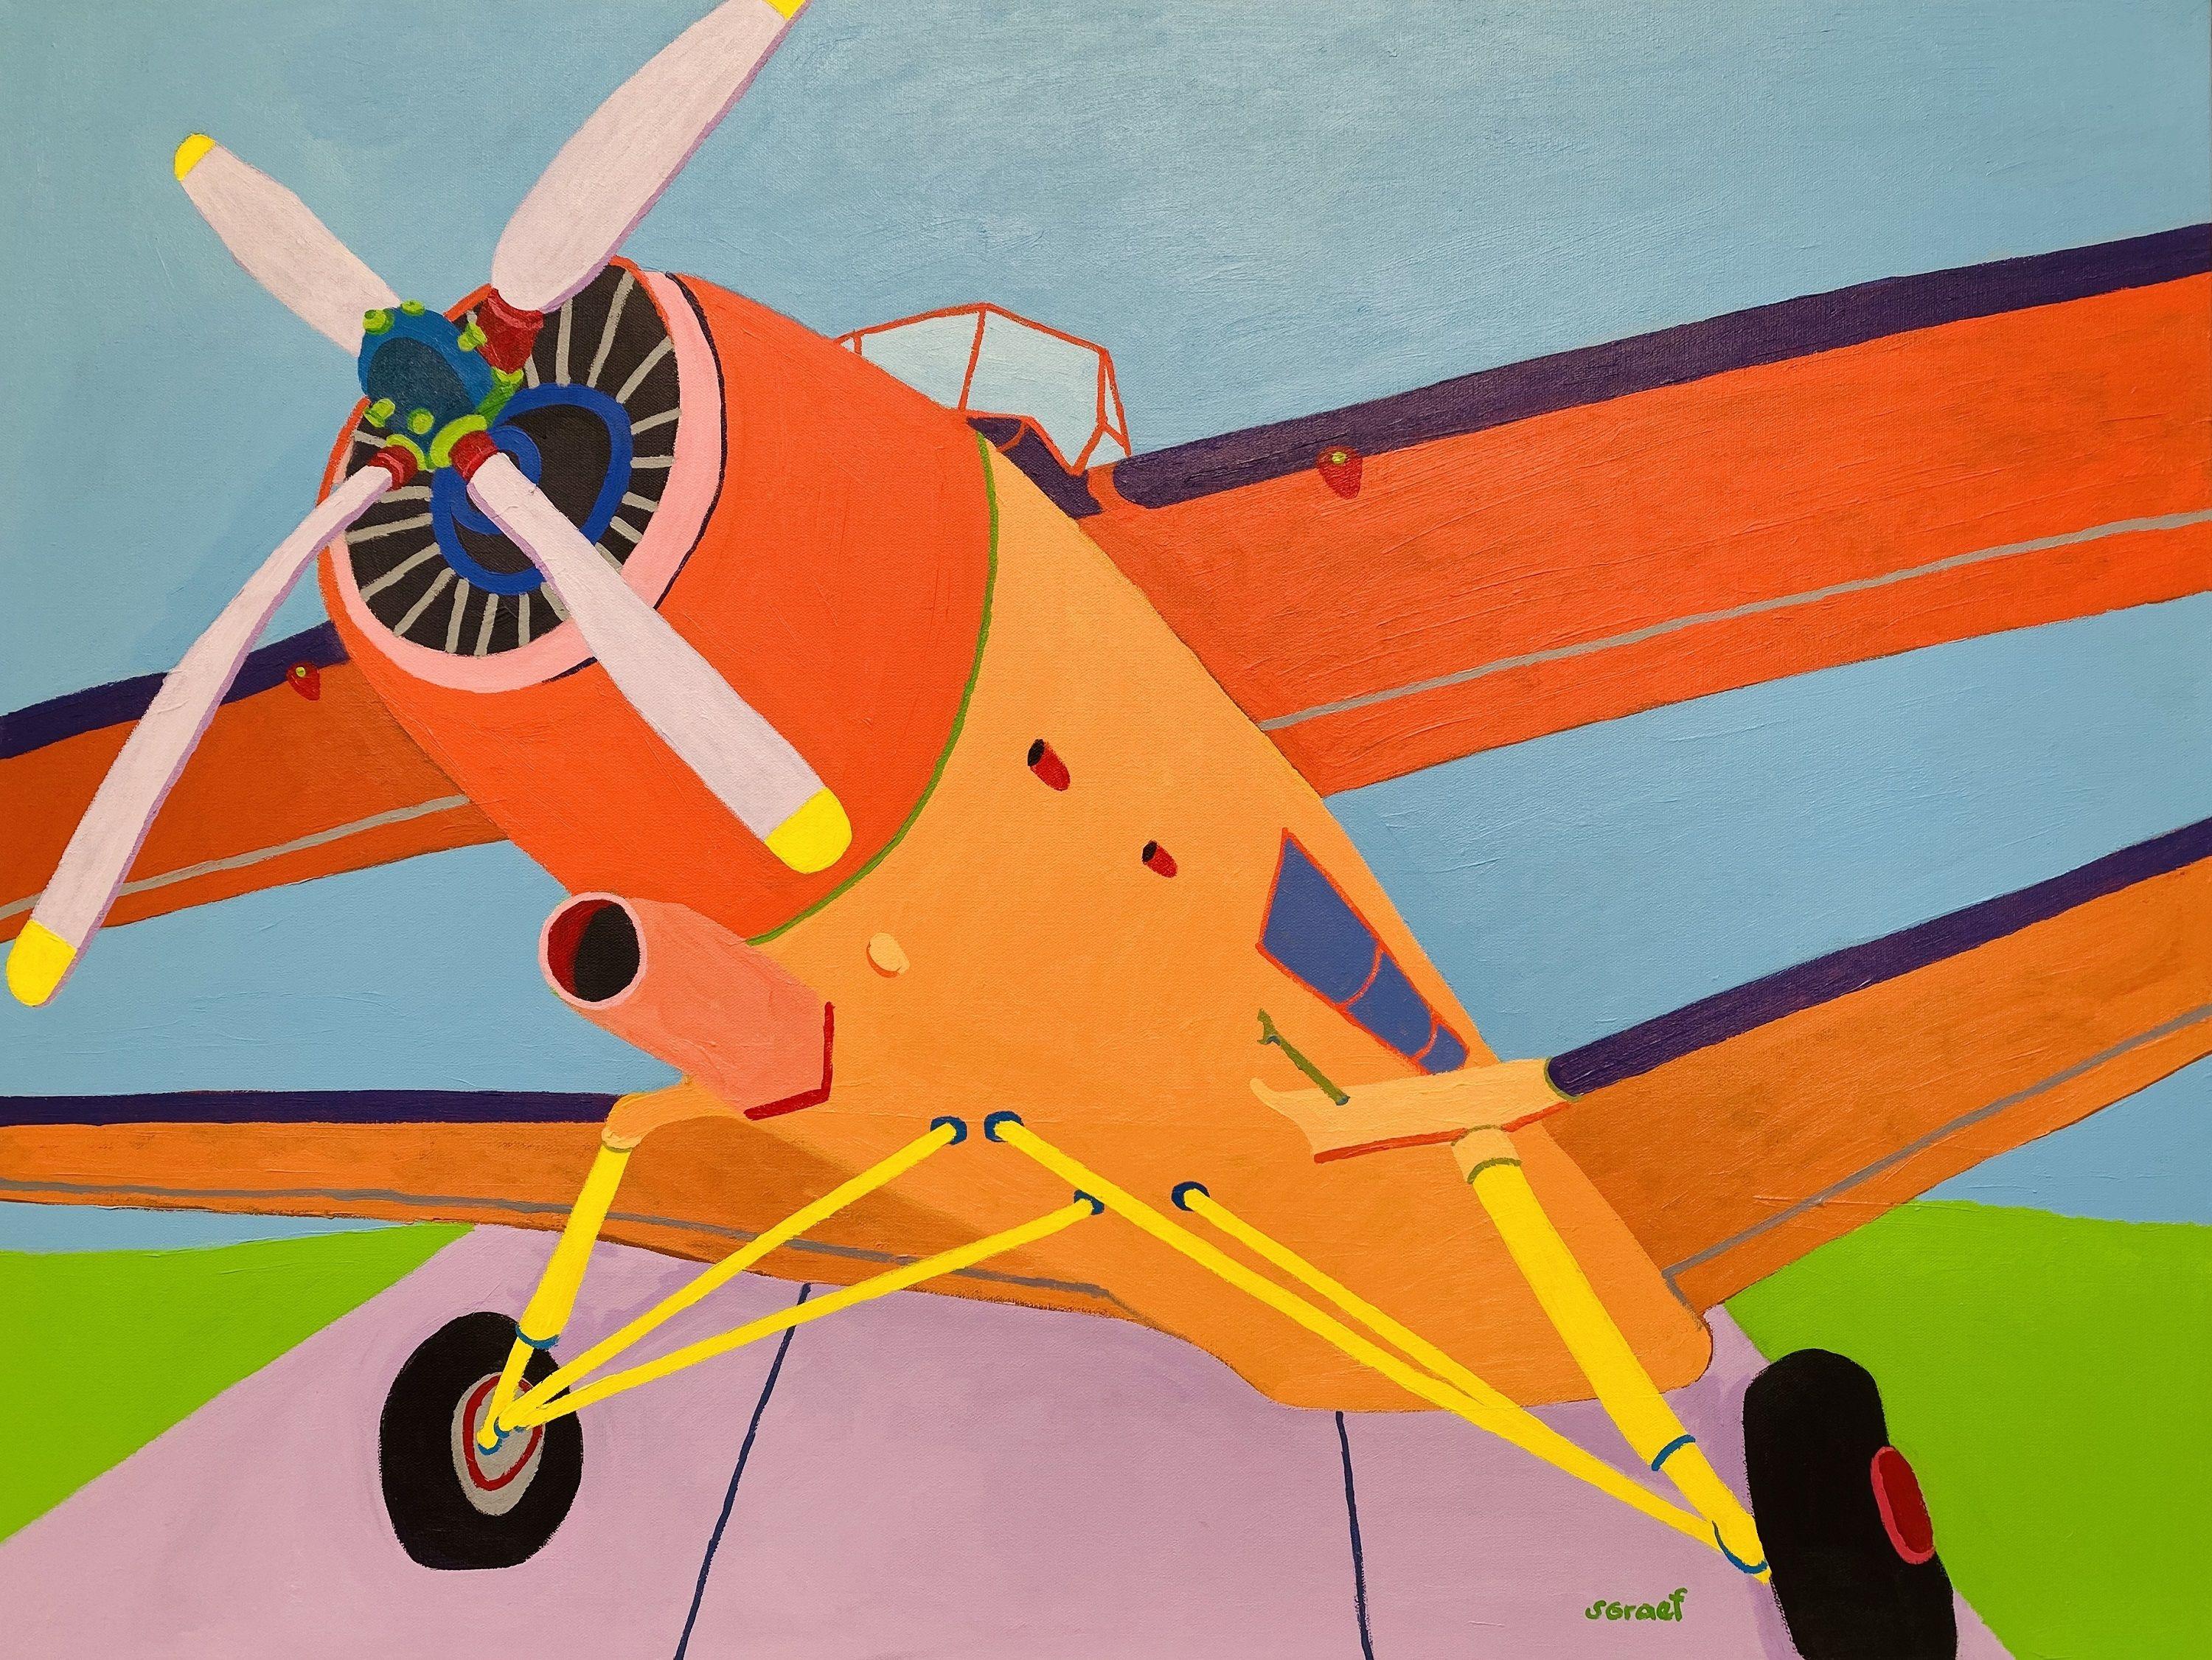 A random small private plane as seen at the regional airport near where I live. It just caught my eye and made me want to look closer and take some photos to paint it.  The artwork measures 30 x 40 x .75 inches, is unframed with neatly painted edges